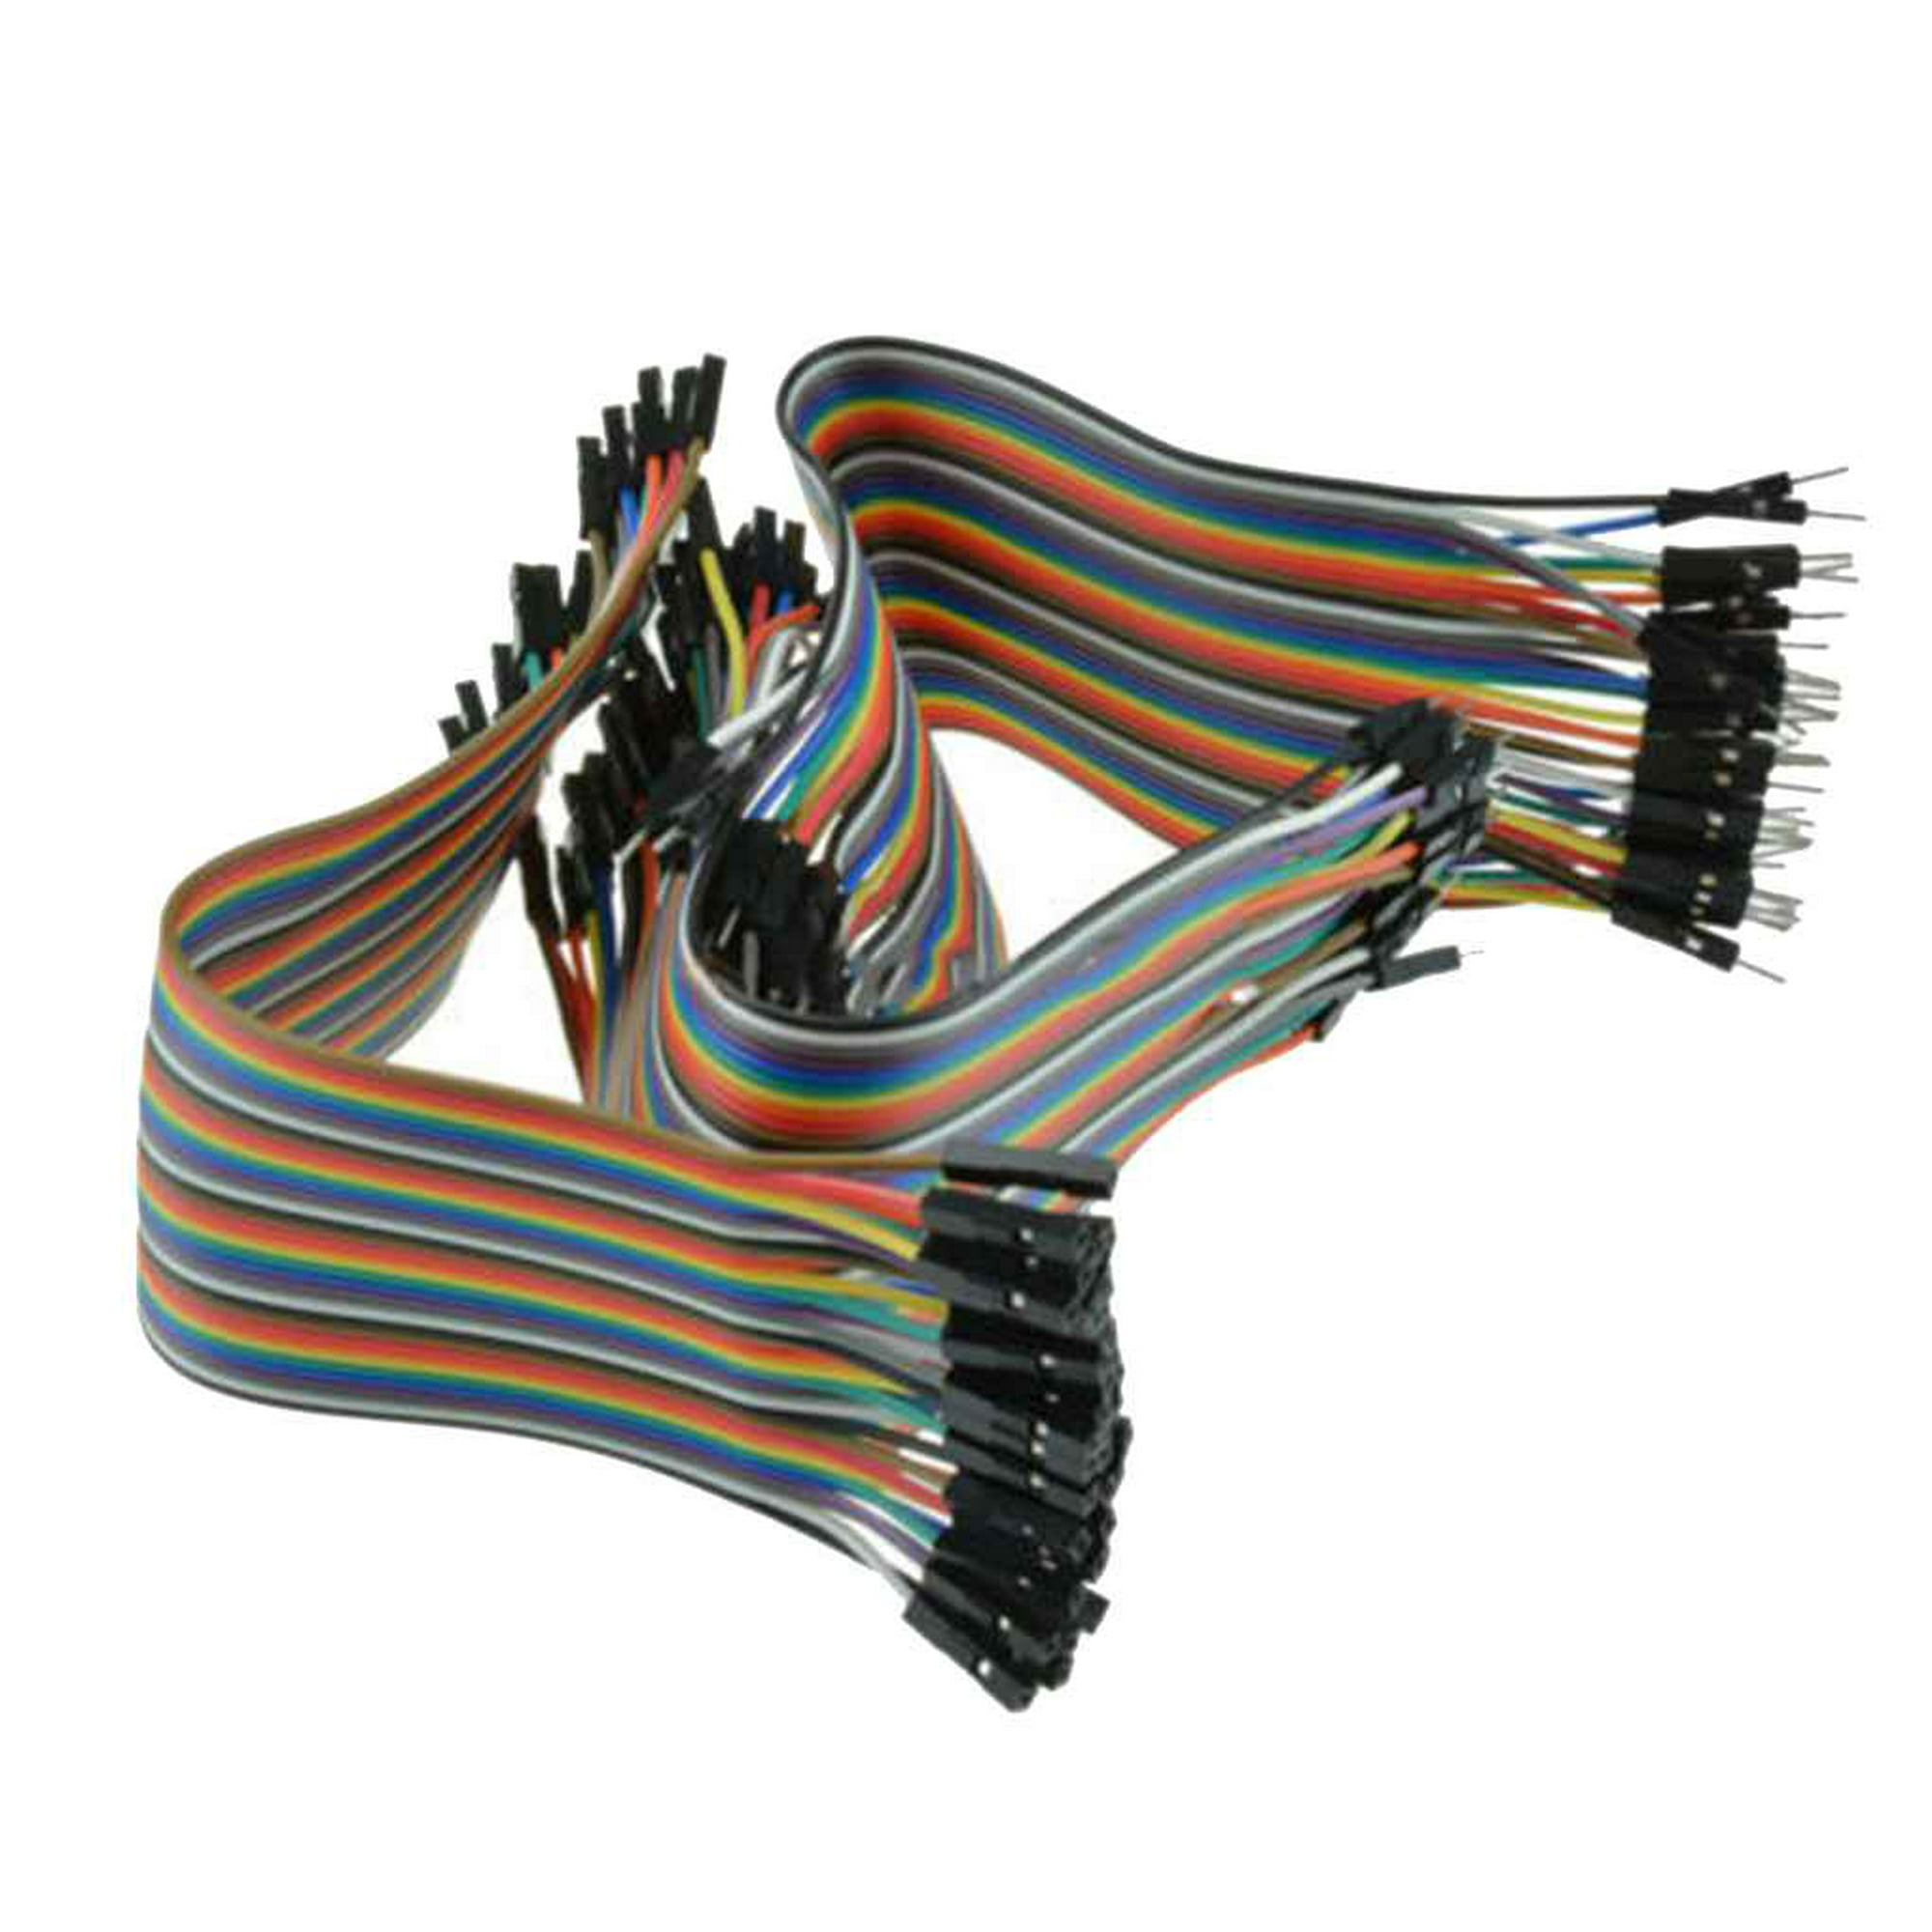 40 CABLES MACHO HEMBRA 10cm jumpers dupont 2,54 arduino